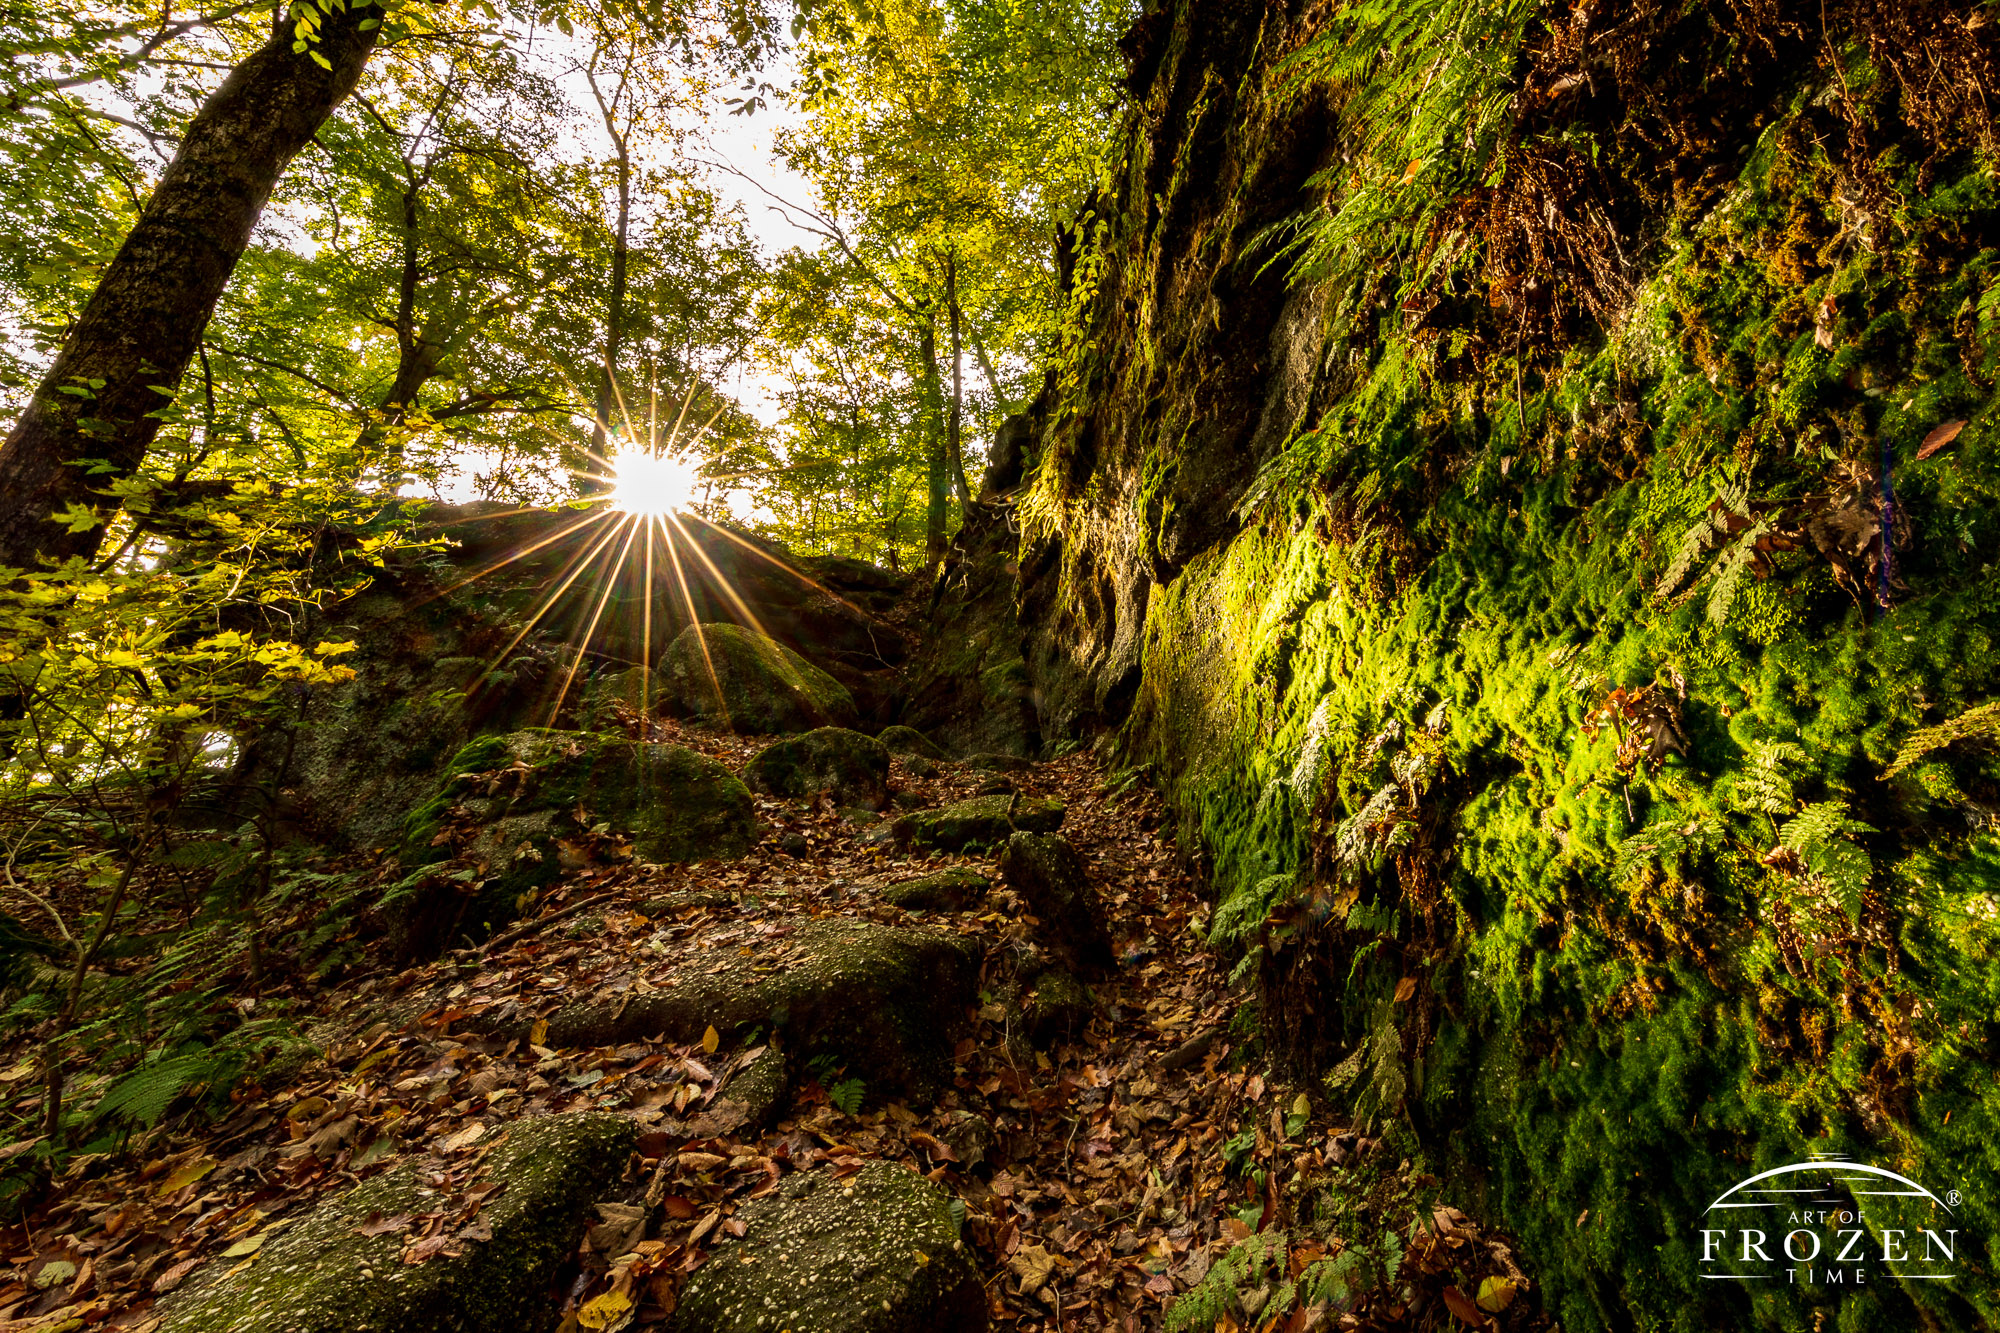 Peaceful Ohio woodland scene where moss-covered rock outcrops are painted in warm sunlight.